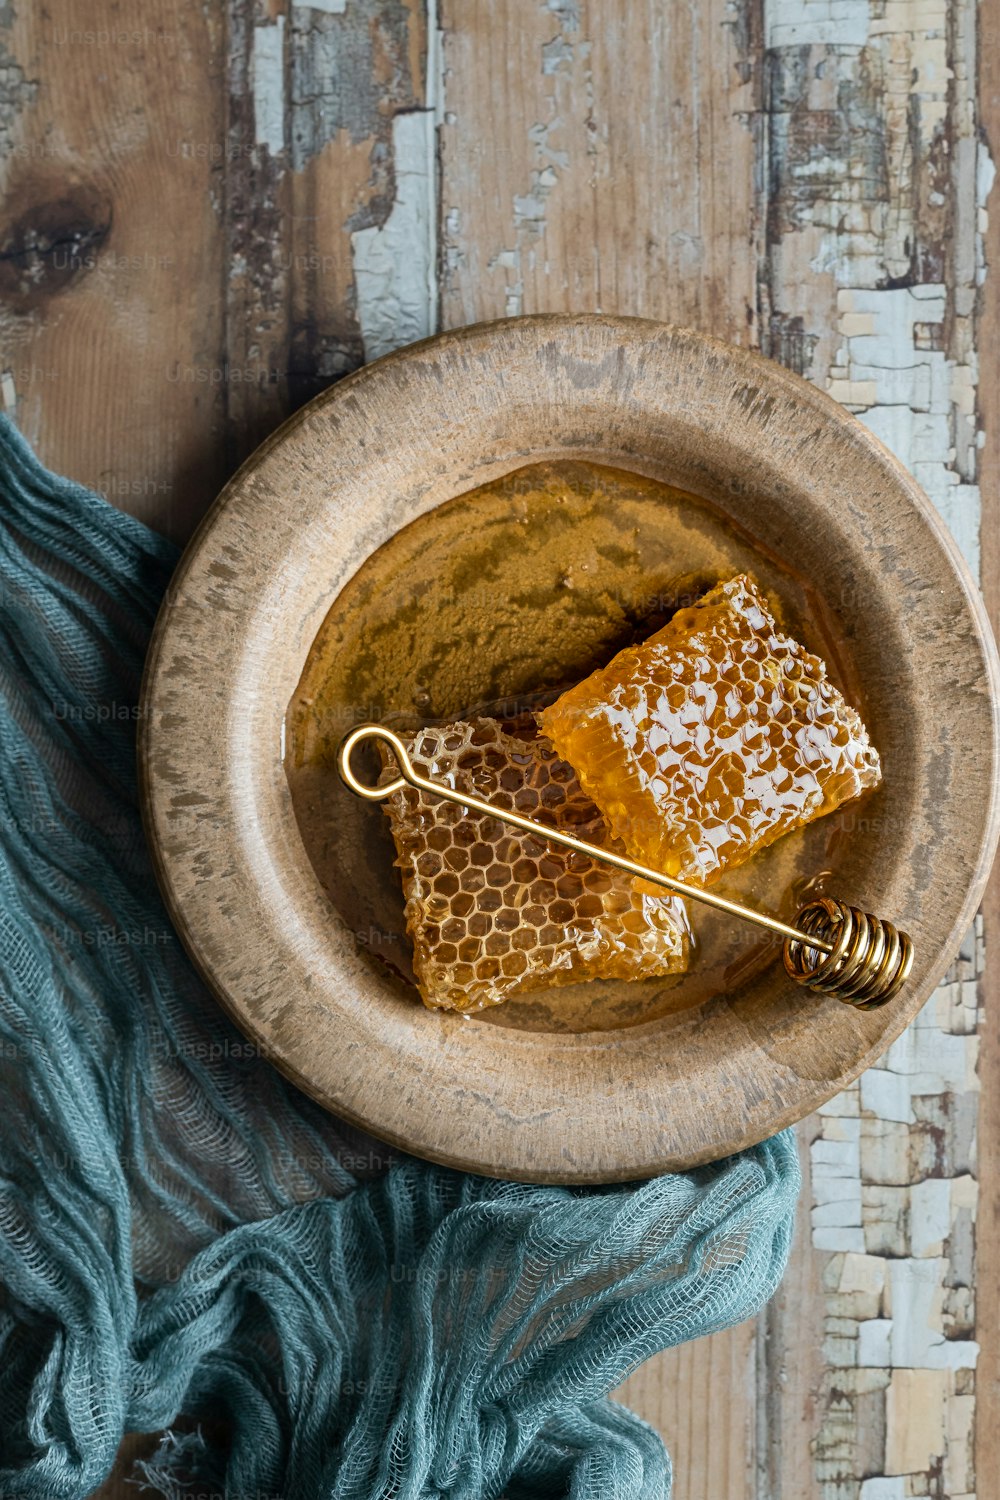 100+ Honeycomb Pictures  Download Free Images on Unsplash